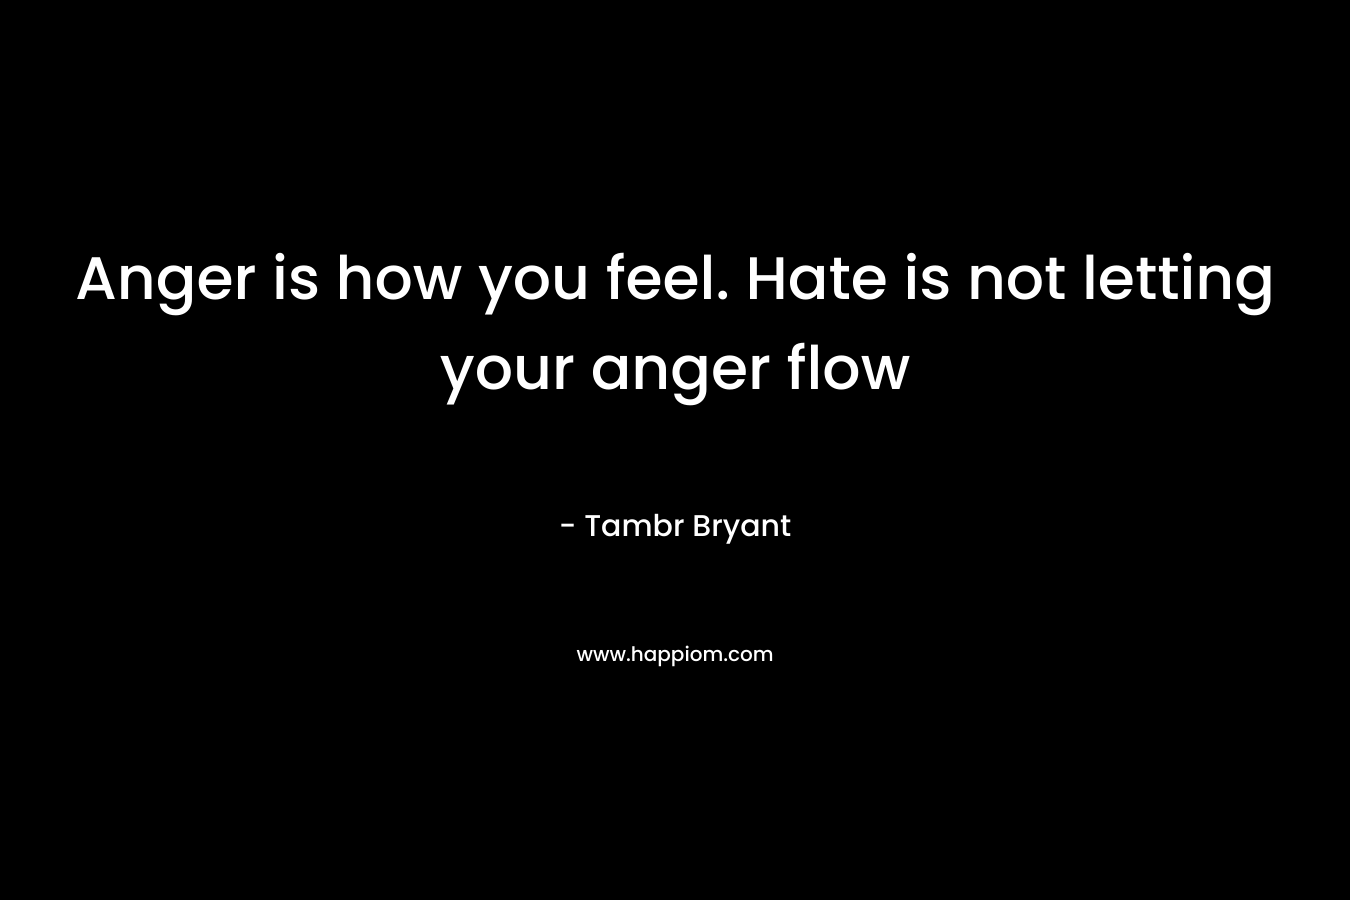 Anger is how you feel. Hate is not letting your anger flow – Tambr Bryant